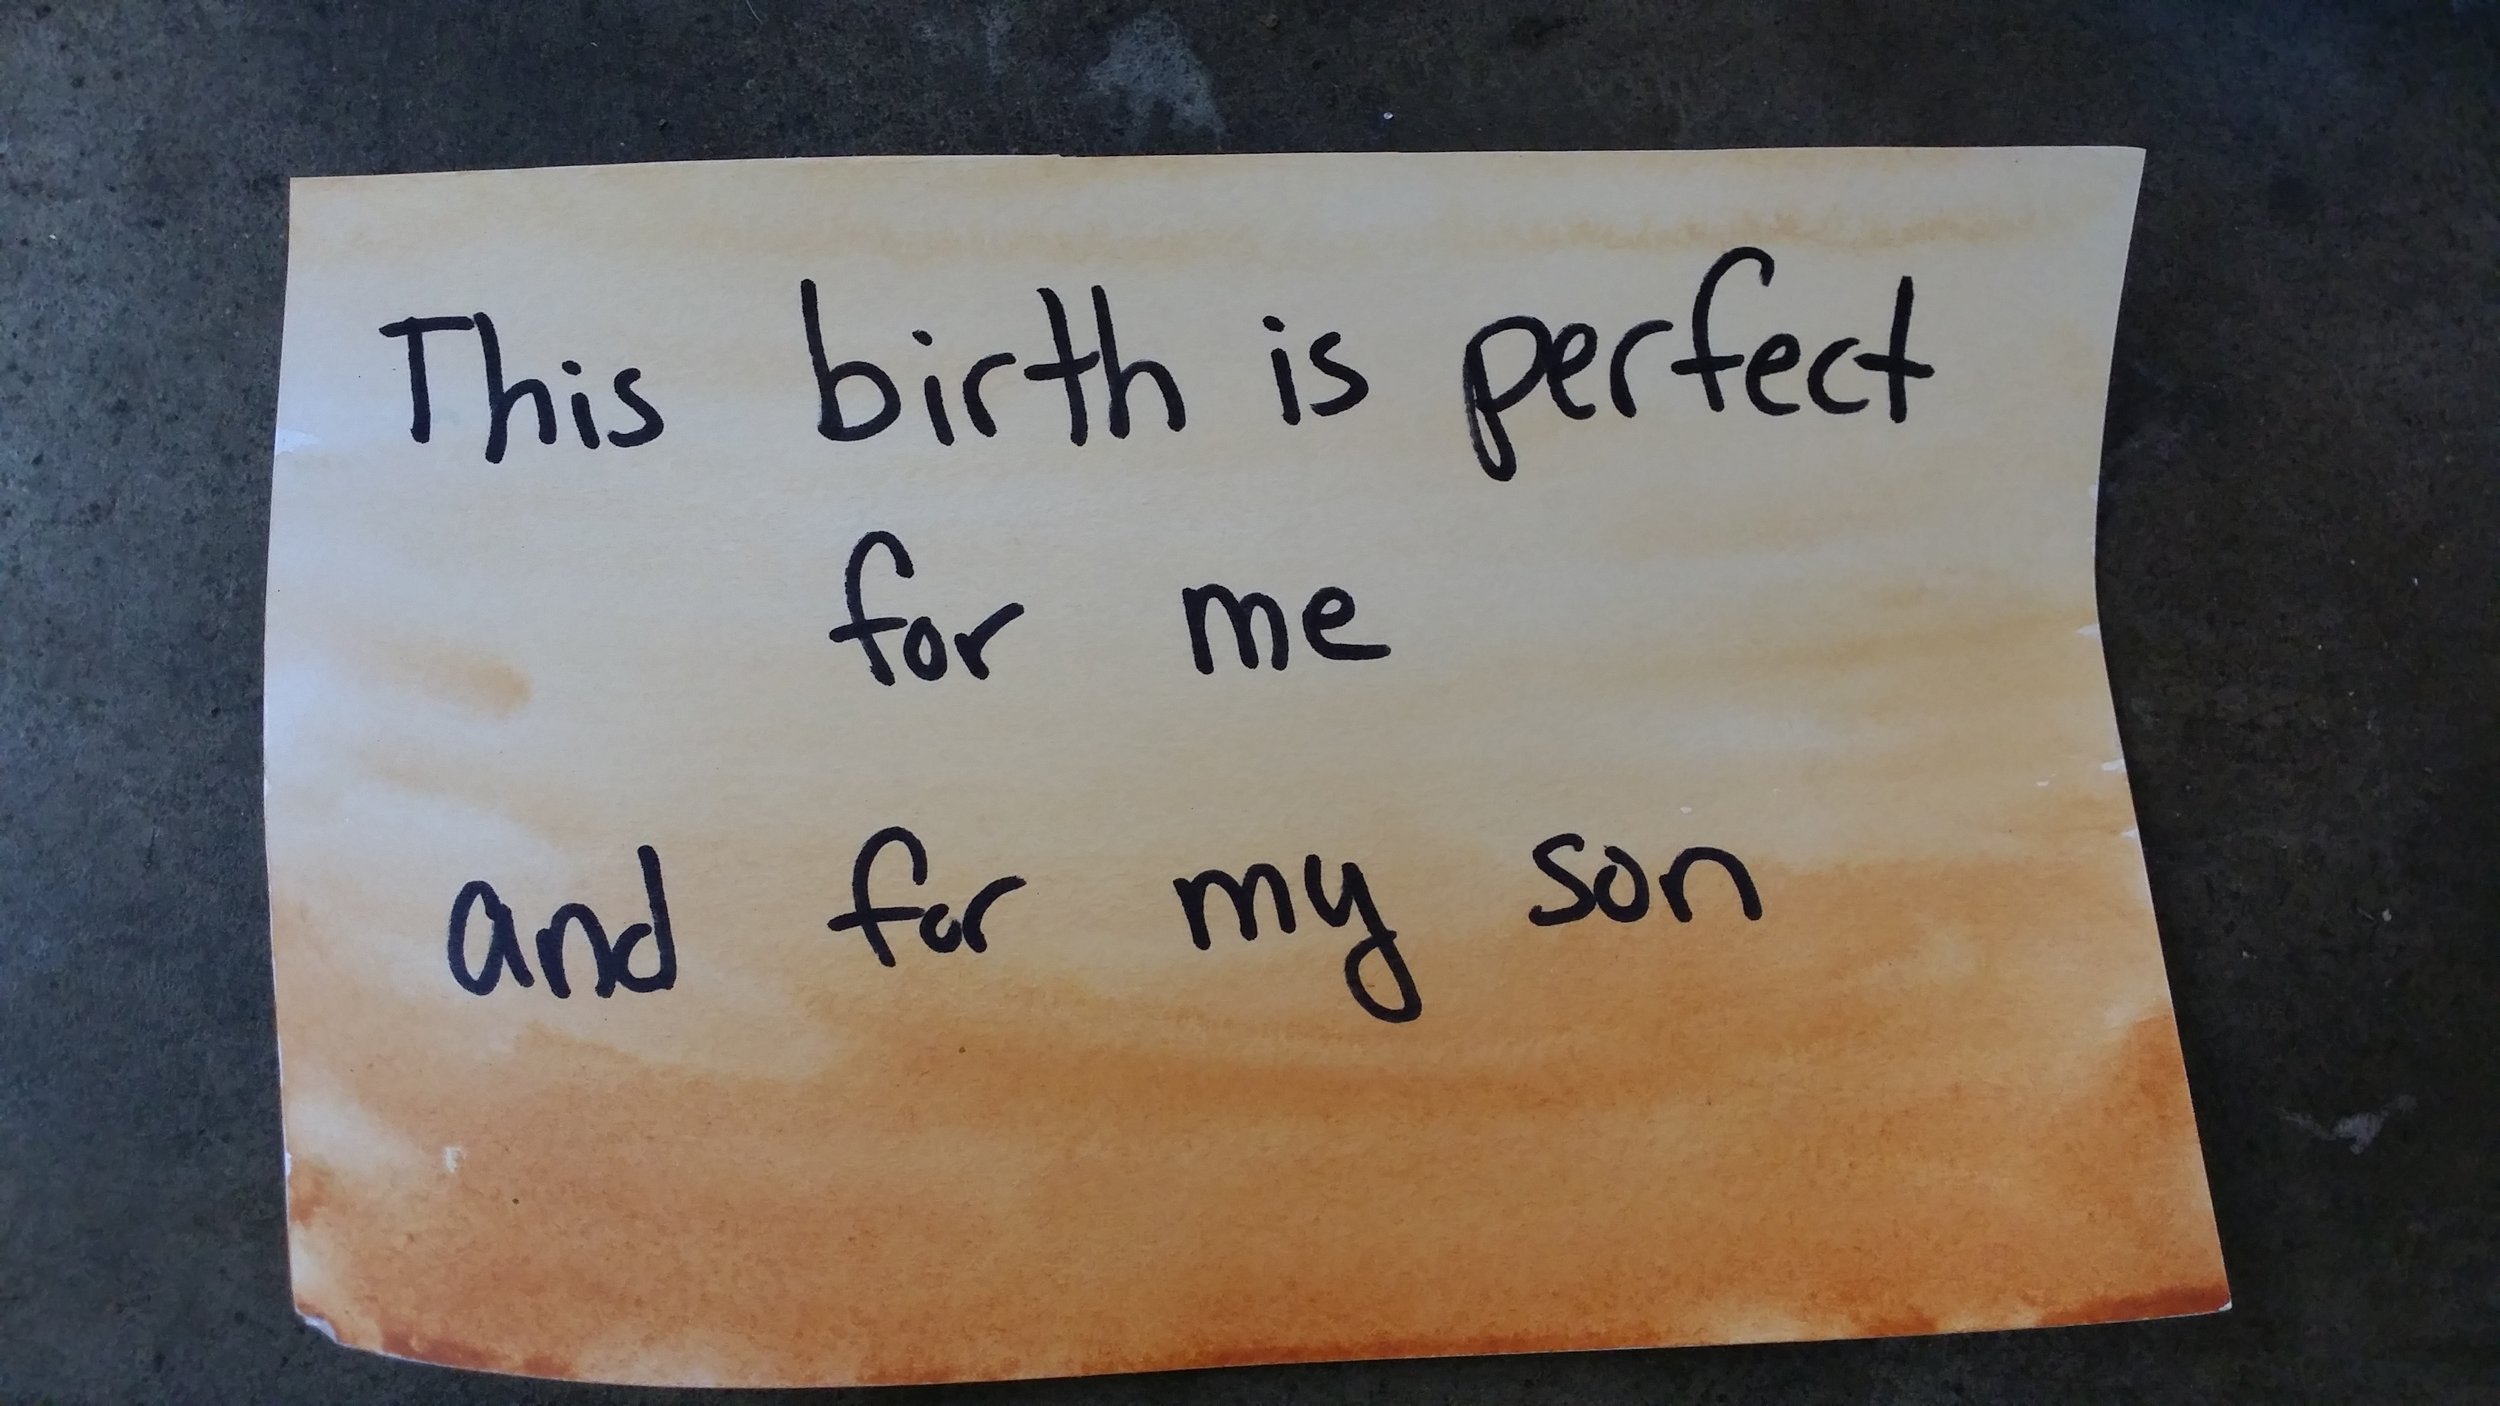 This birth is perfect for me and my son.